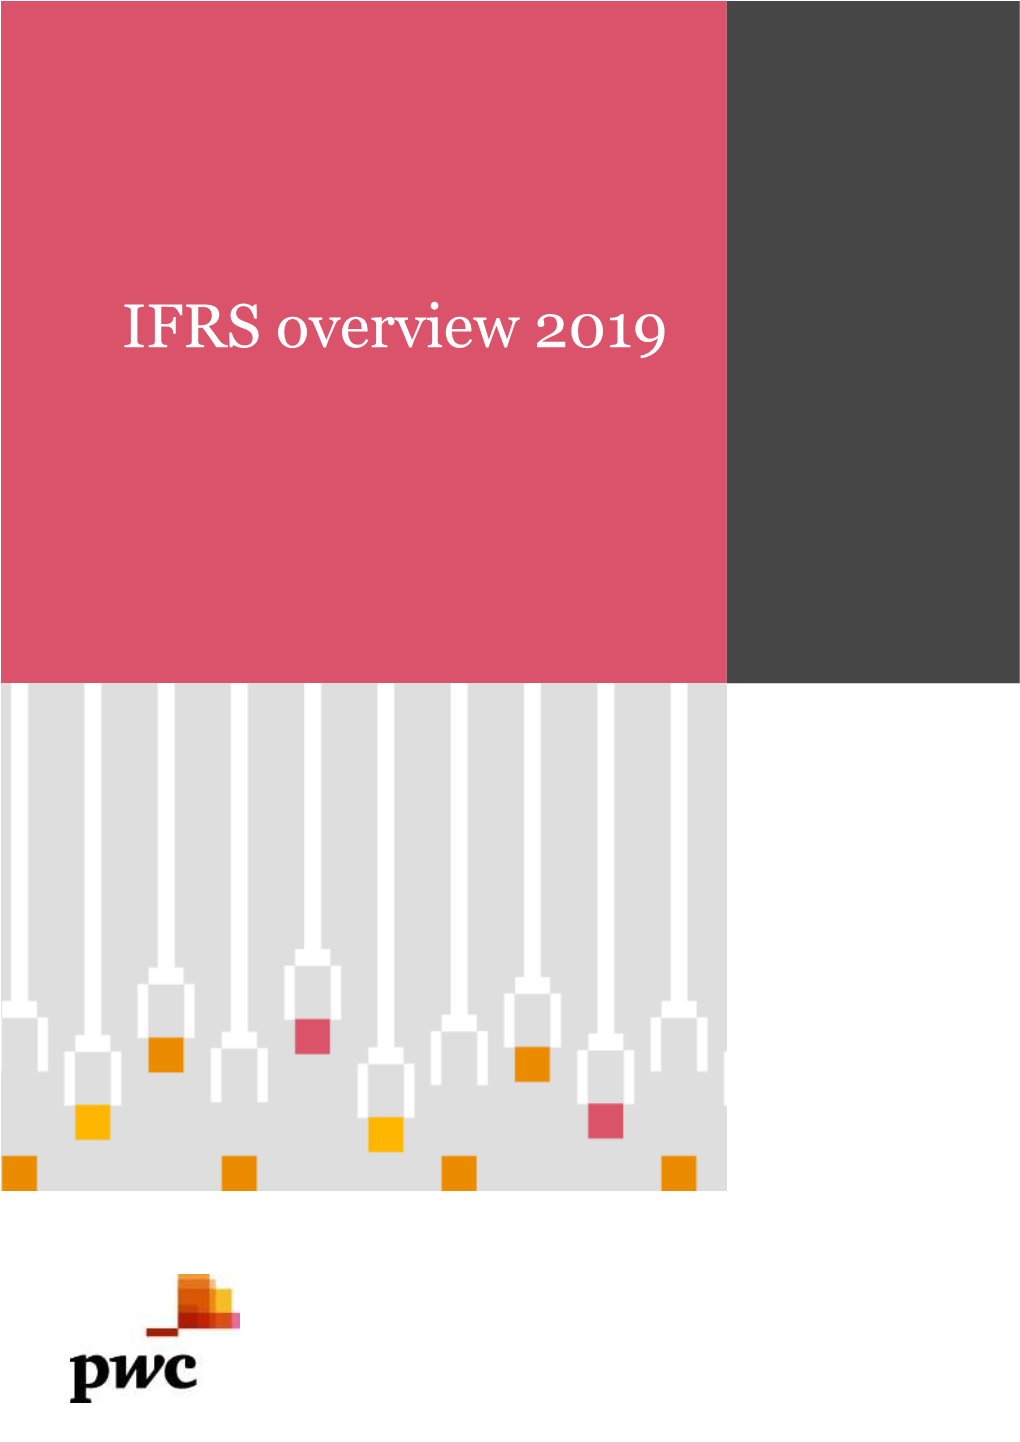 Pwc | IFRS Overview 2019